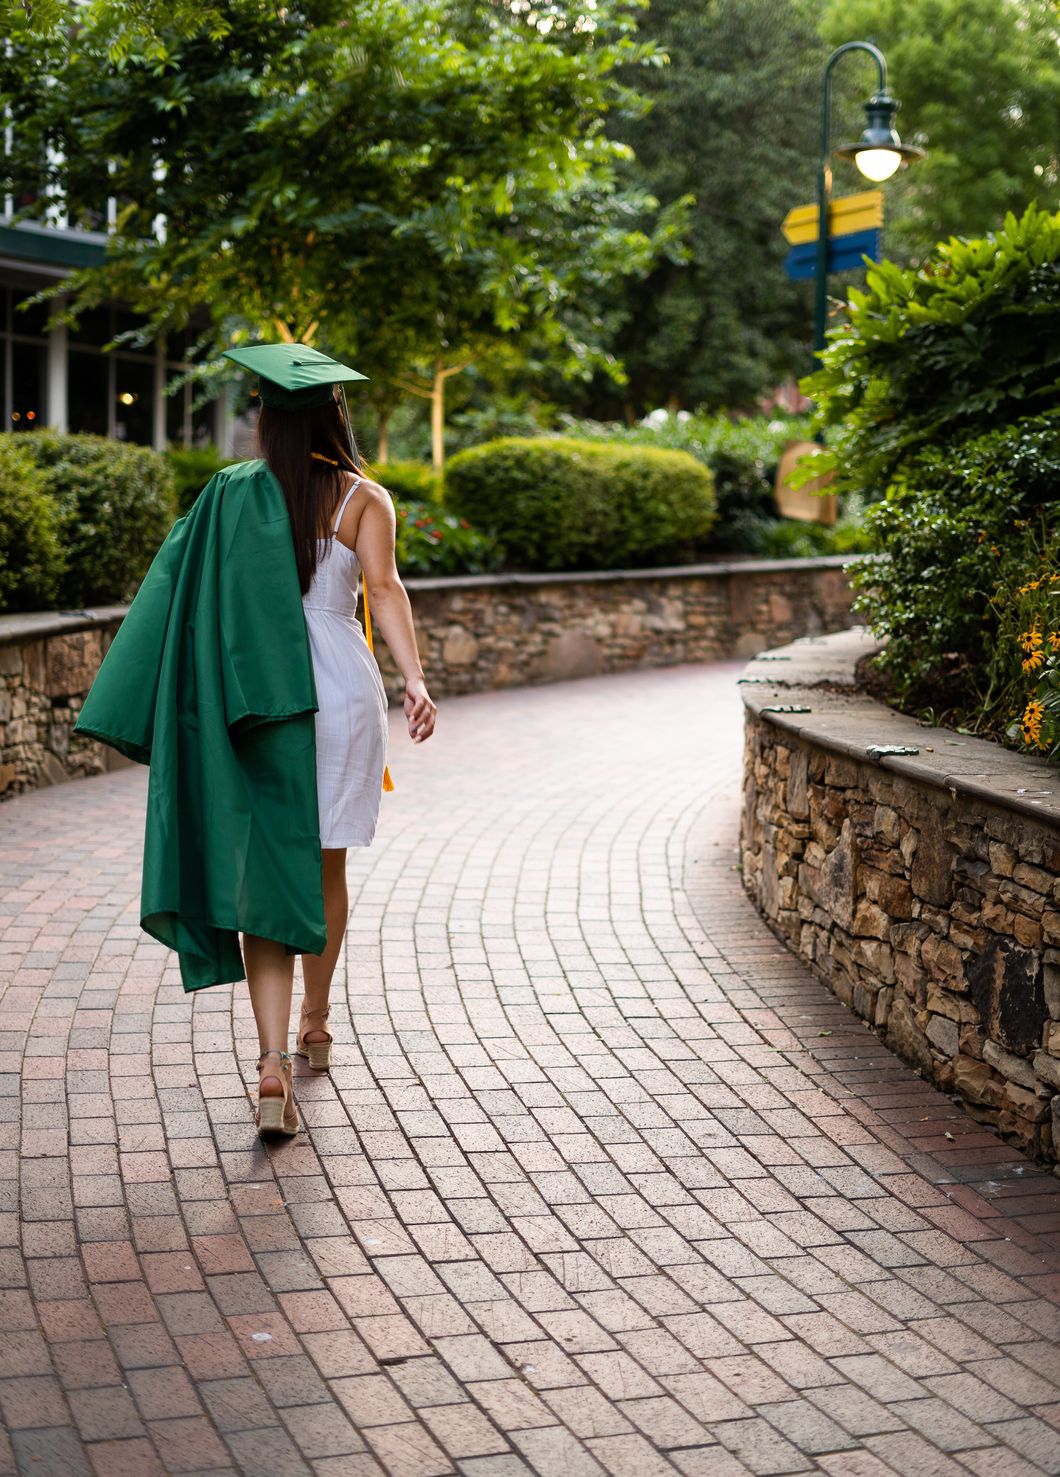 12 Gifts For The College Senior Graduating During The Global Pandemic